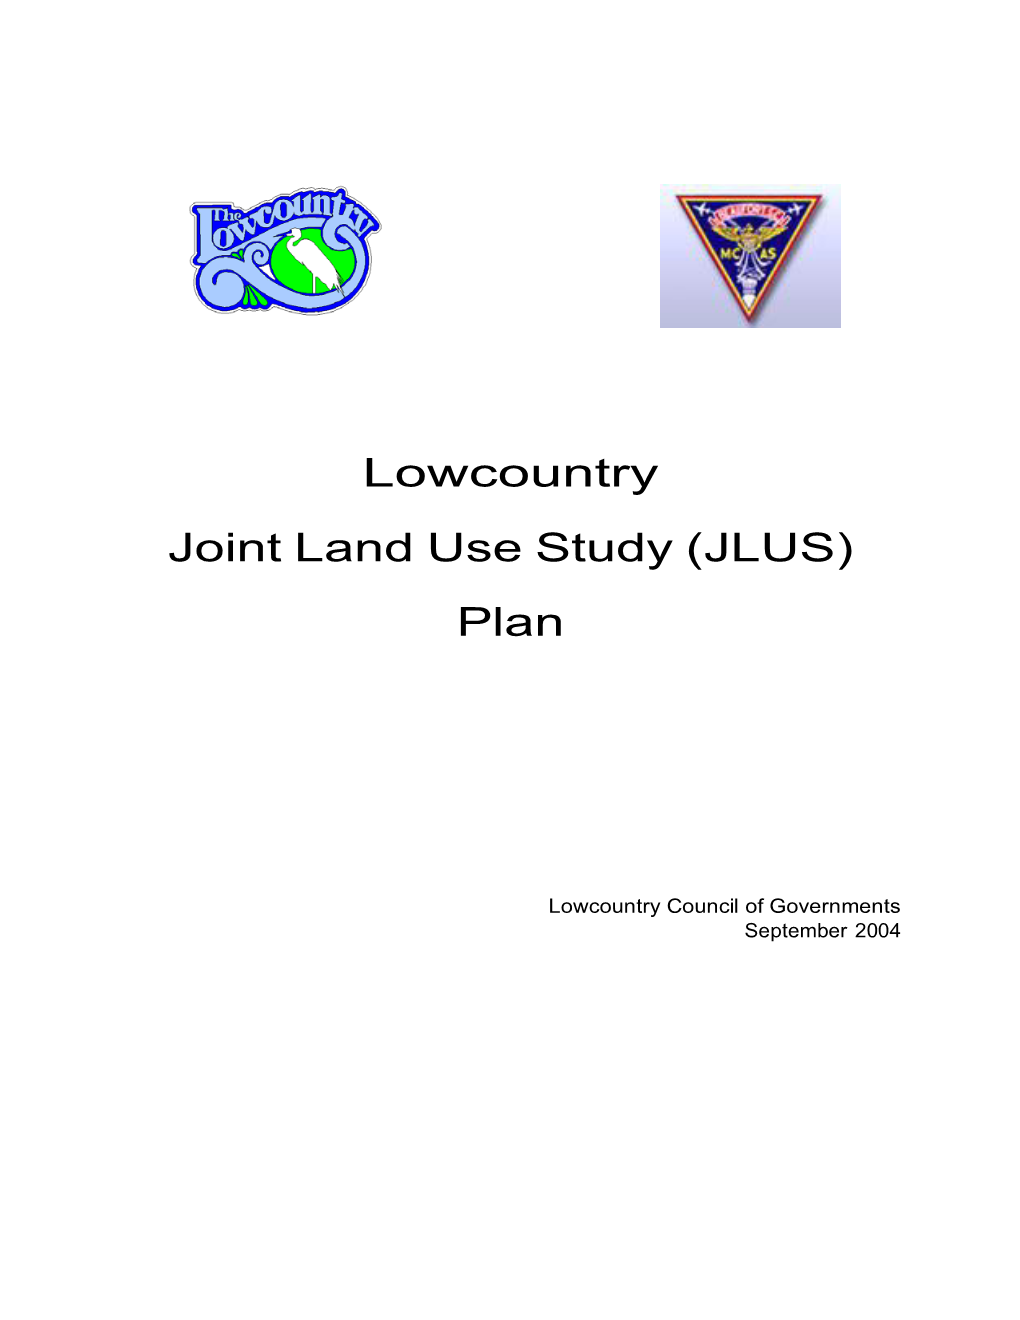 Lowcountry Joint Land Use Study (JLUS) Plan